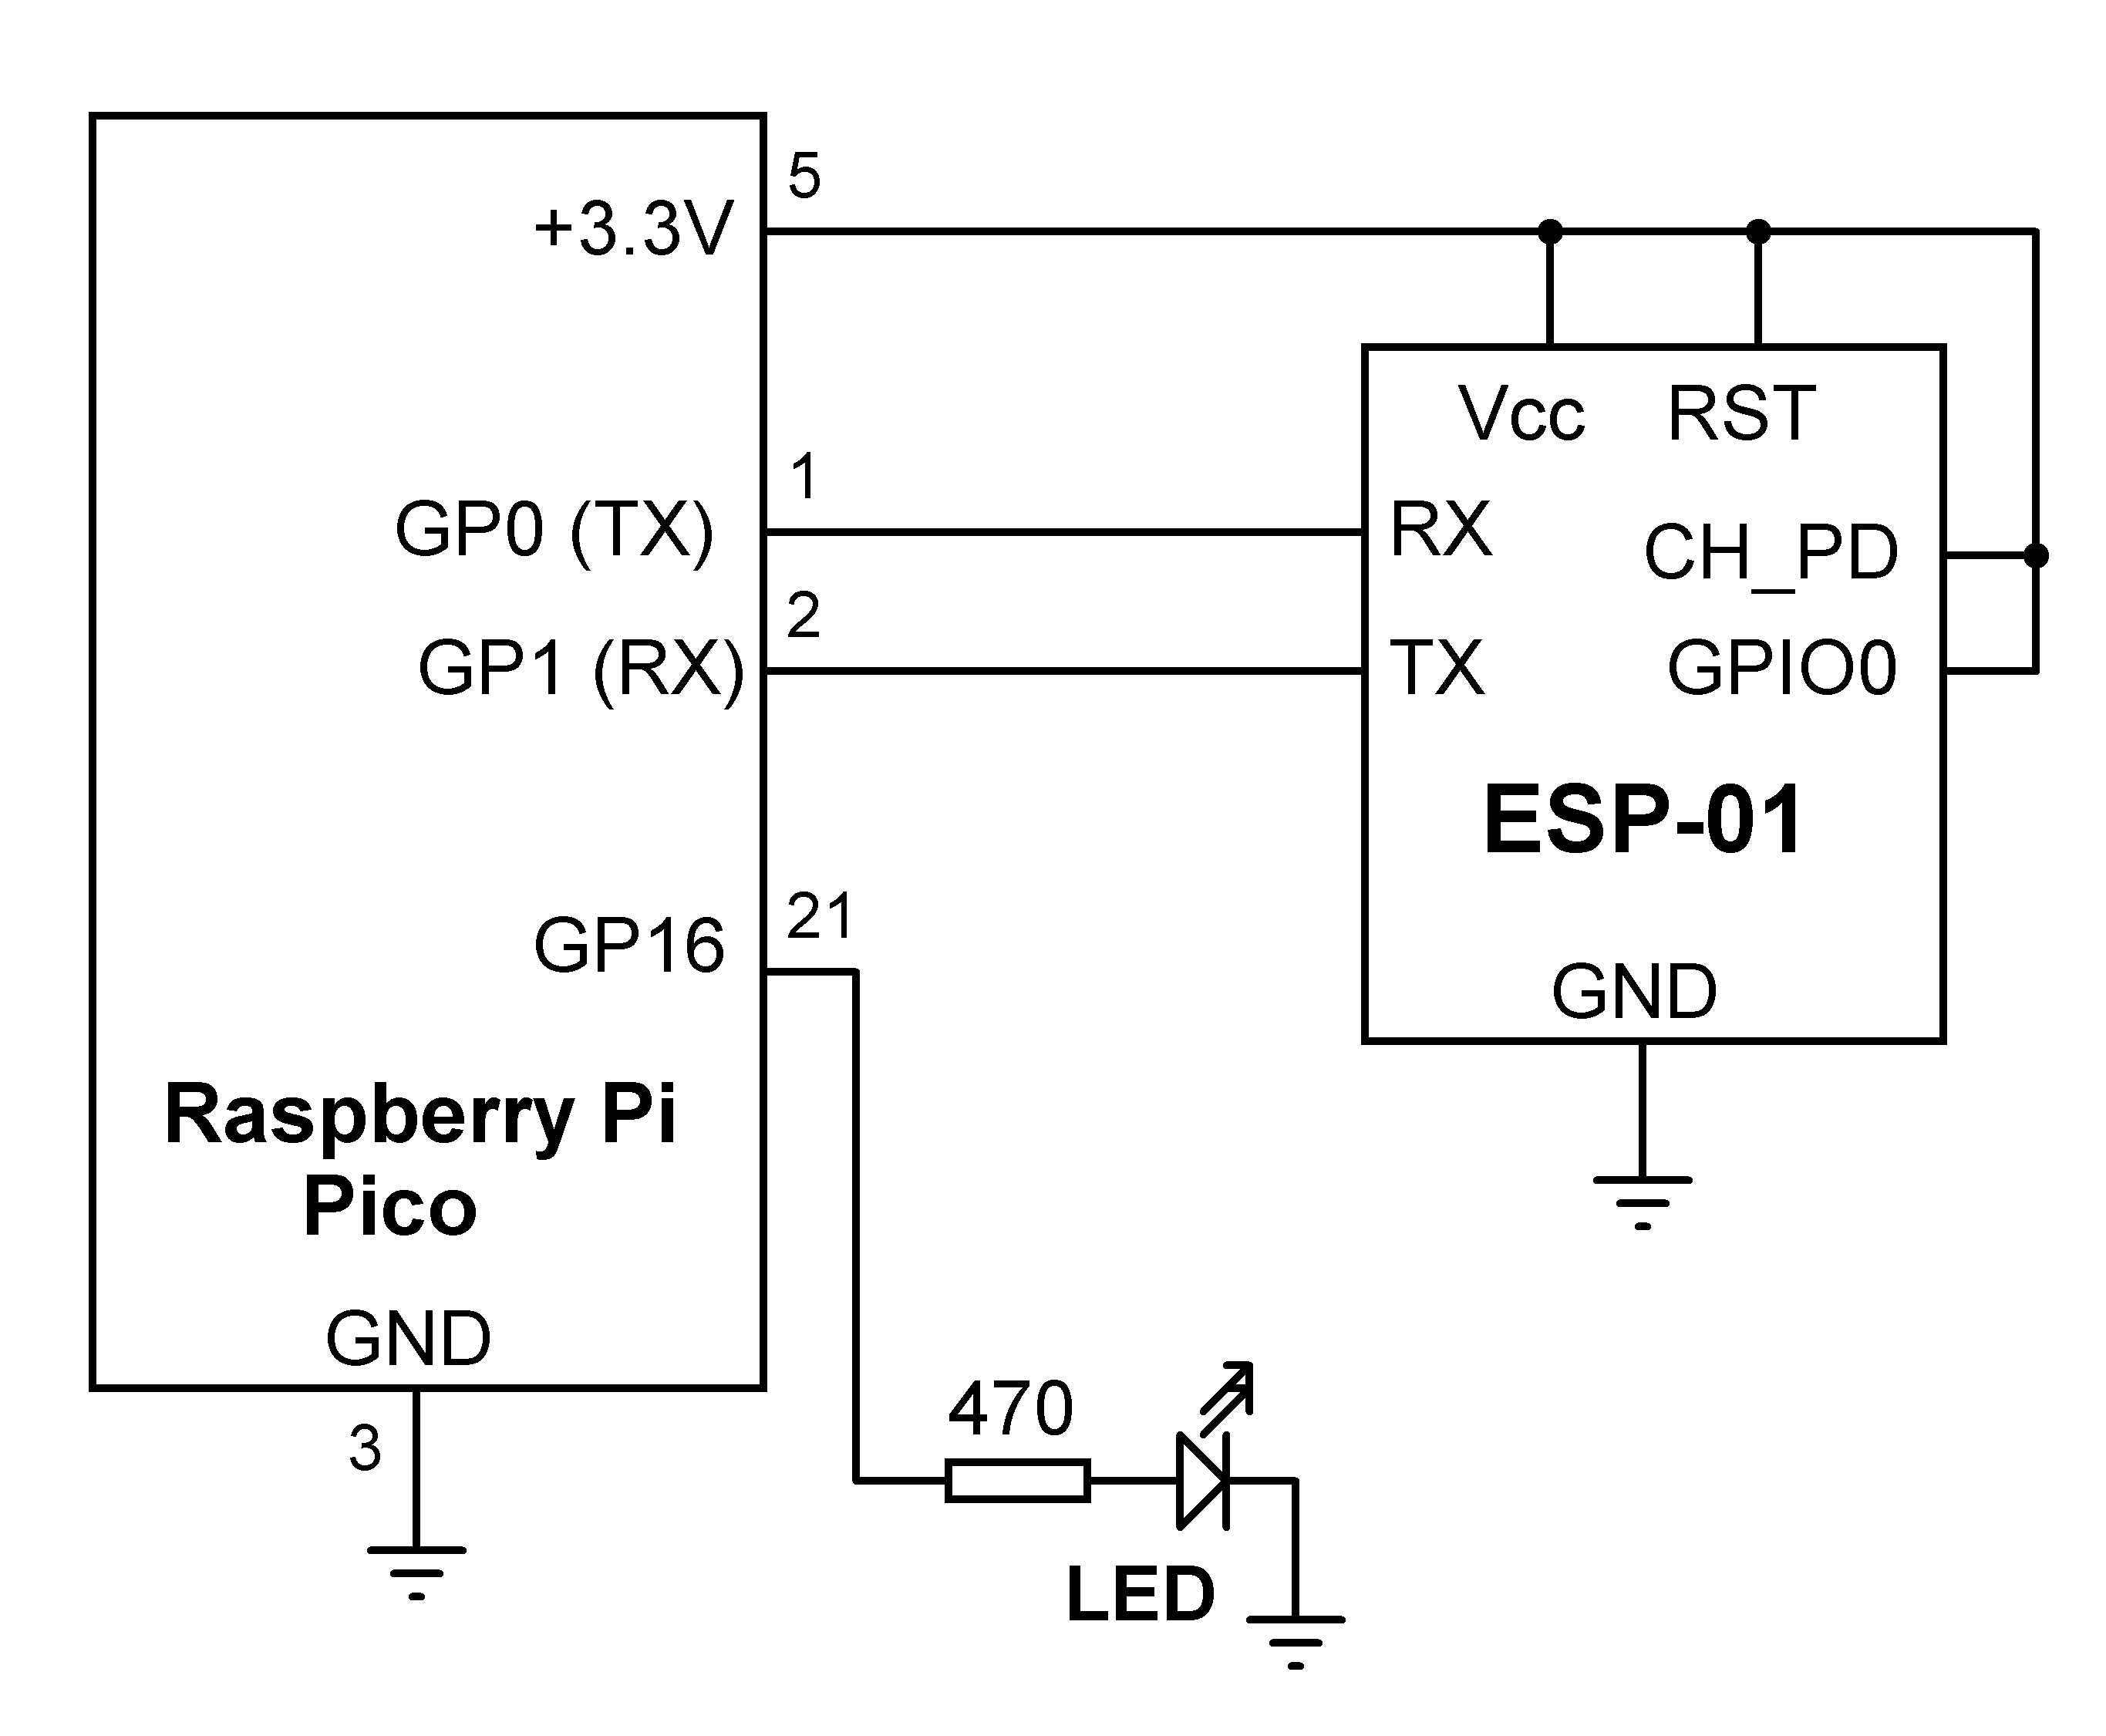 Circuit diagram of the project.